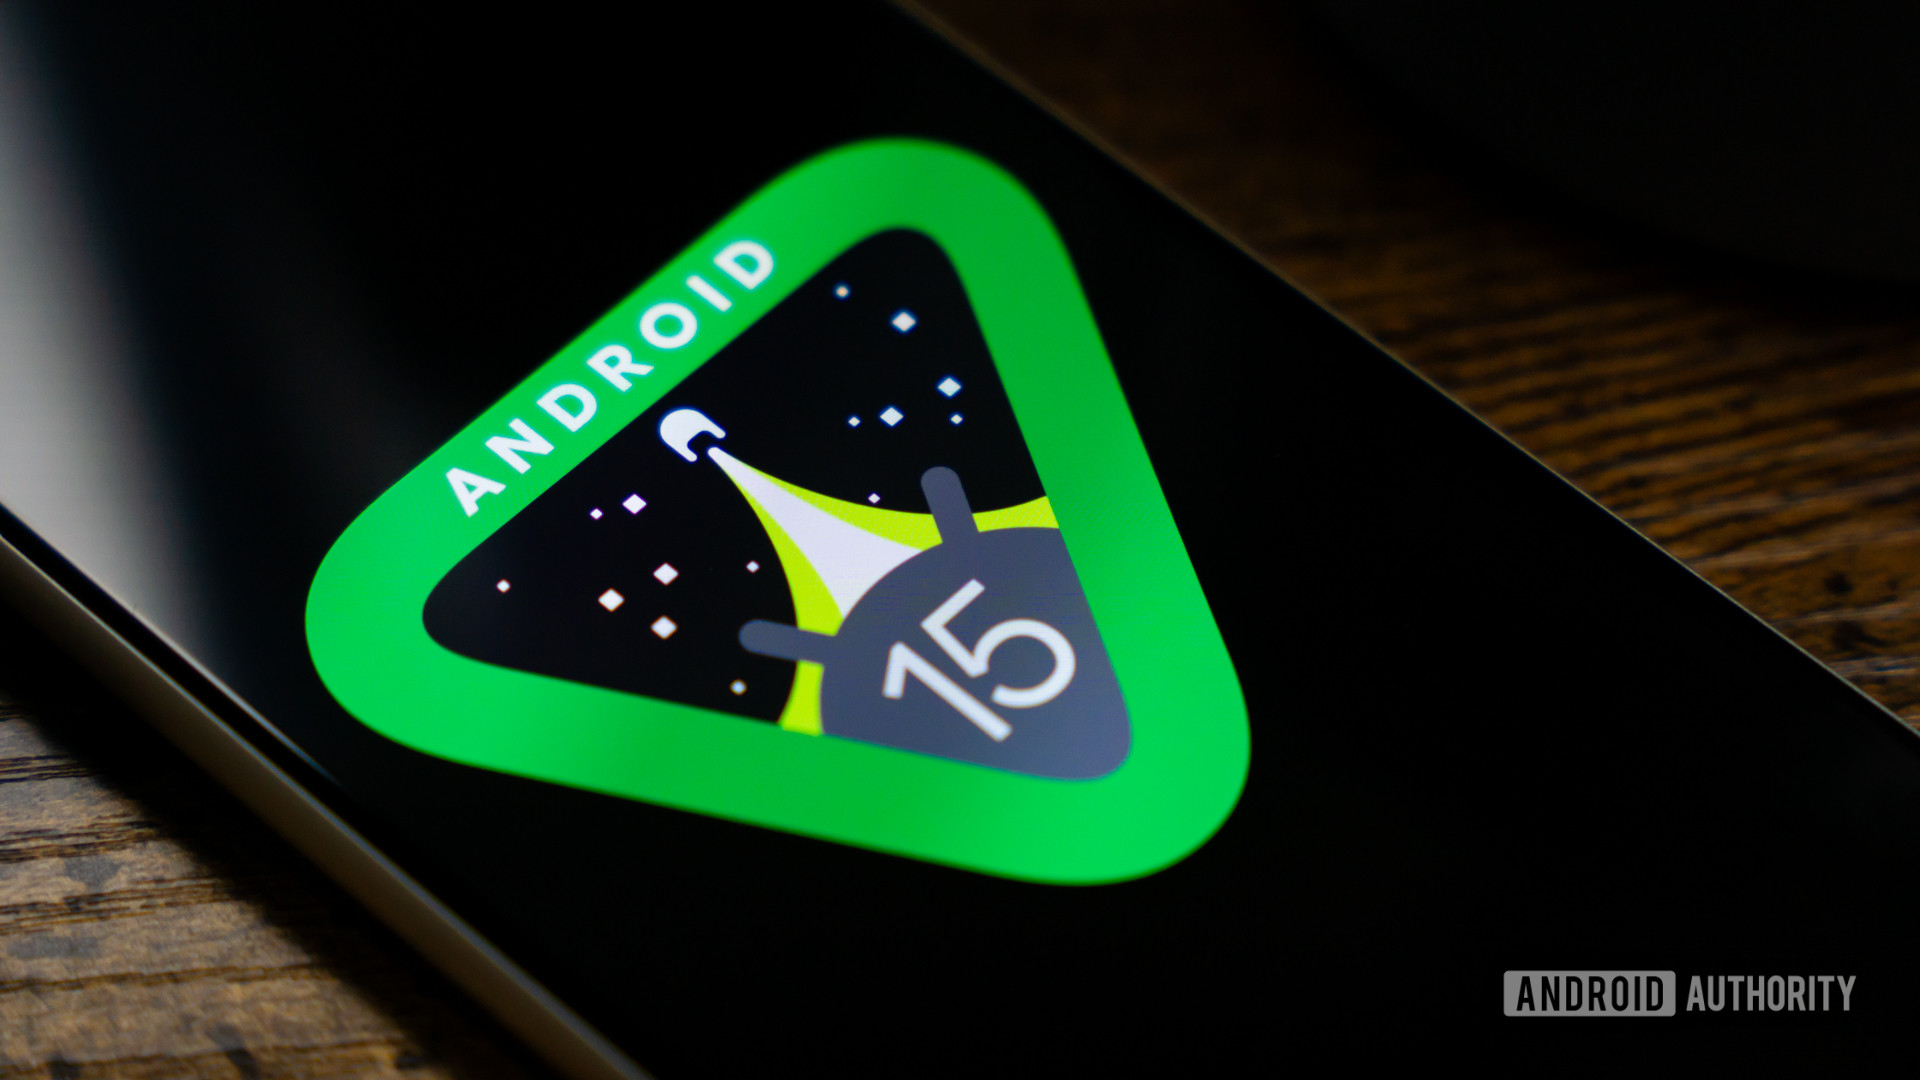 Android 15 logo on smartphone stock photo (2)